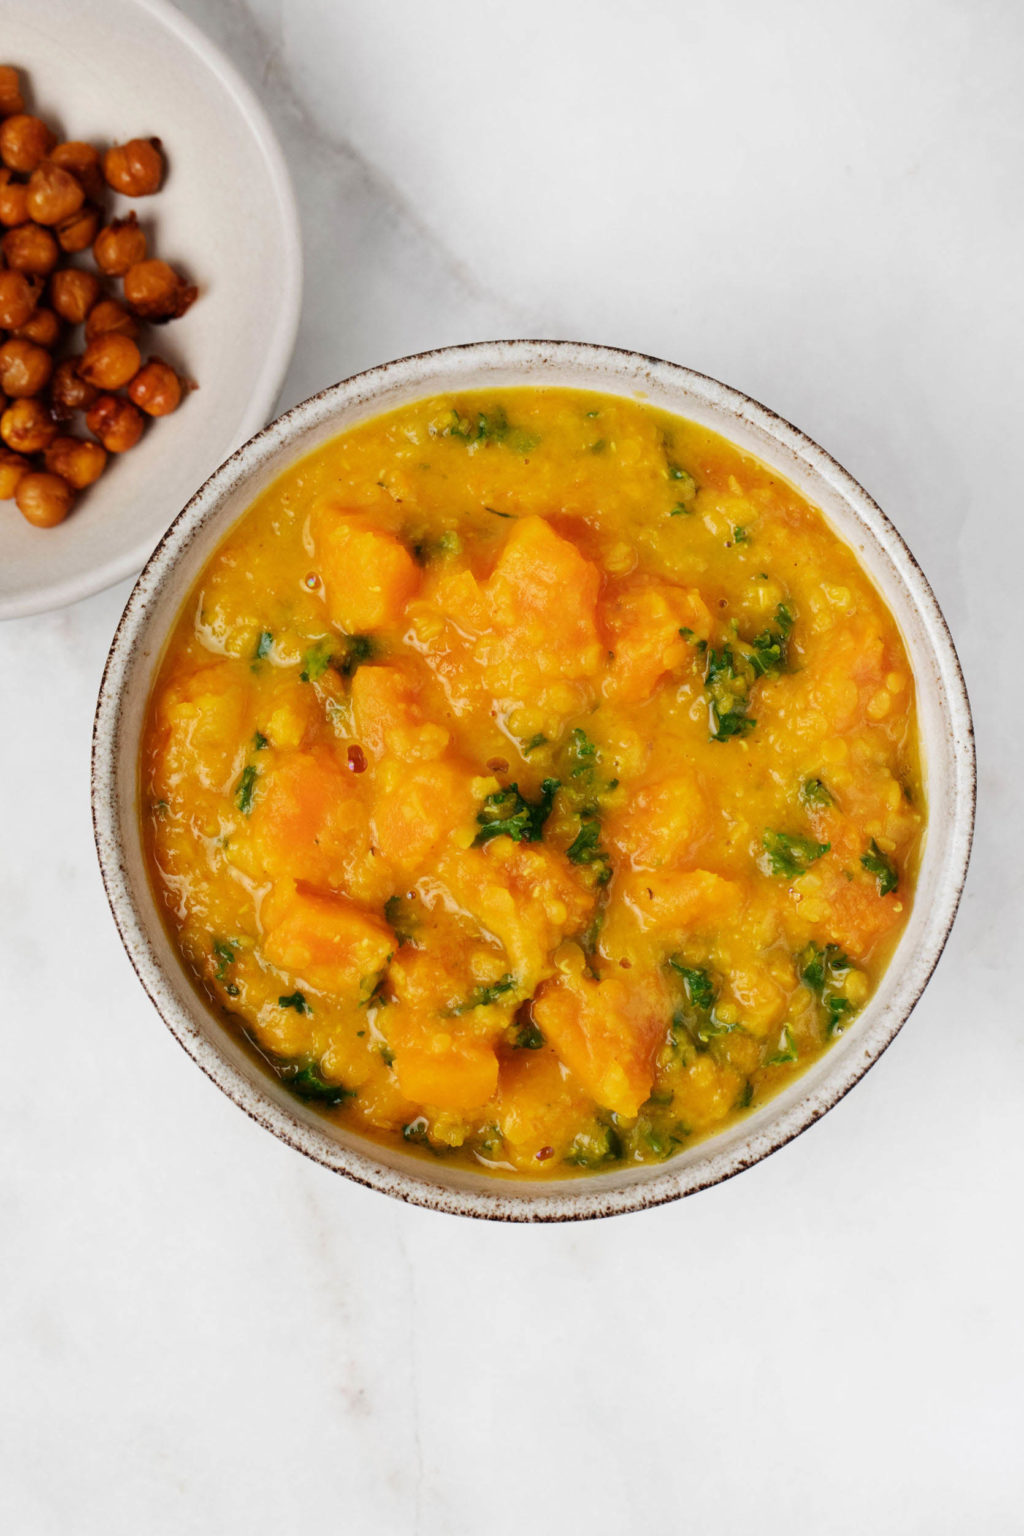 A bowl of nourishing vegetables and broth is standing next to a plate of toasted chickpeas on a white surface.